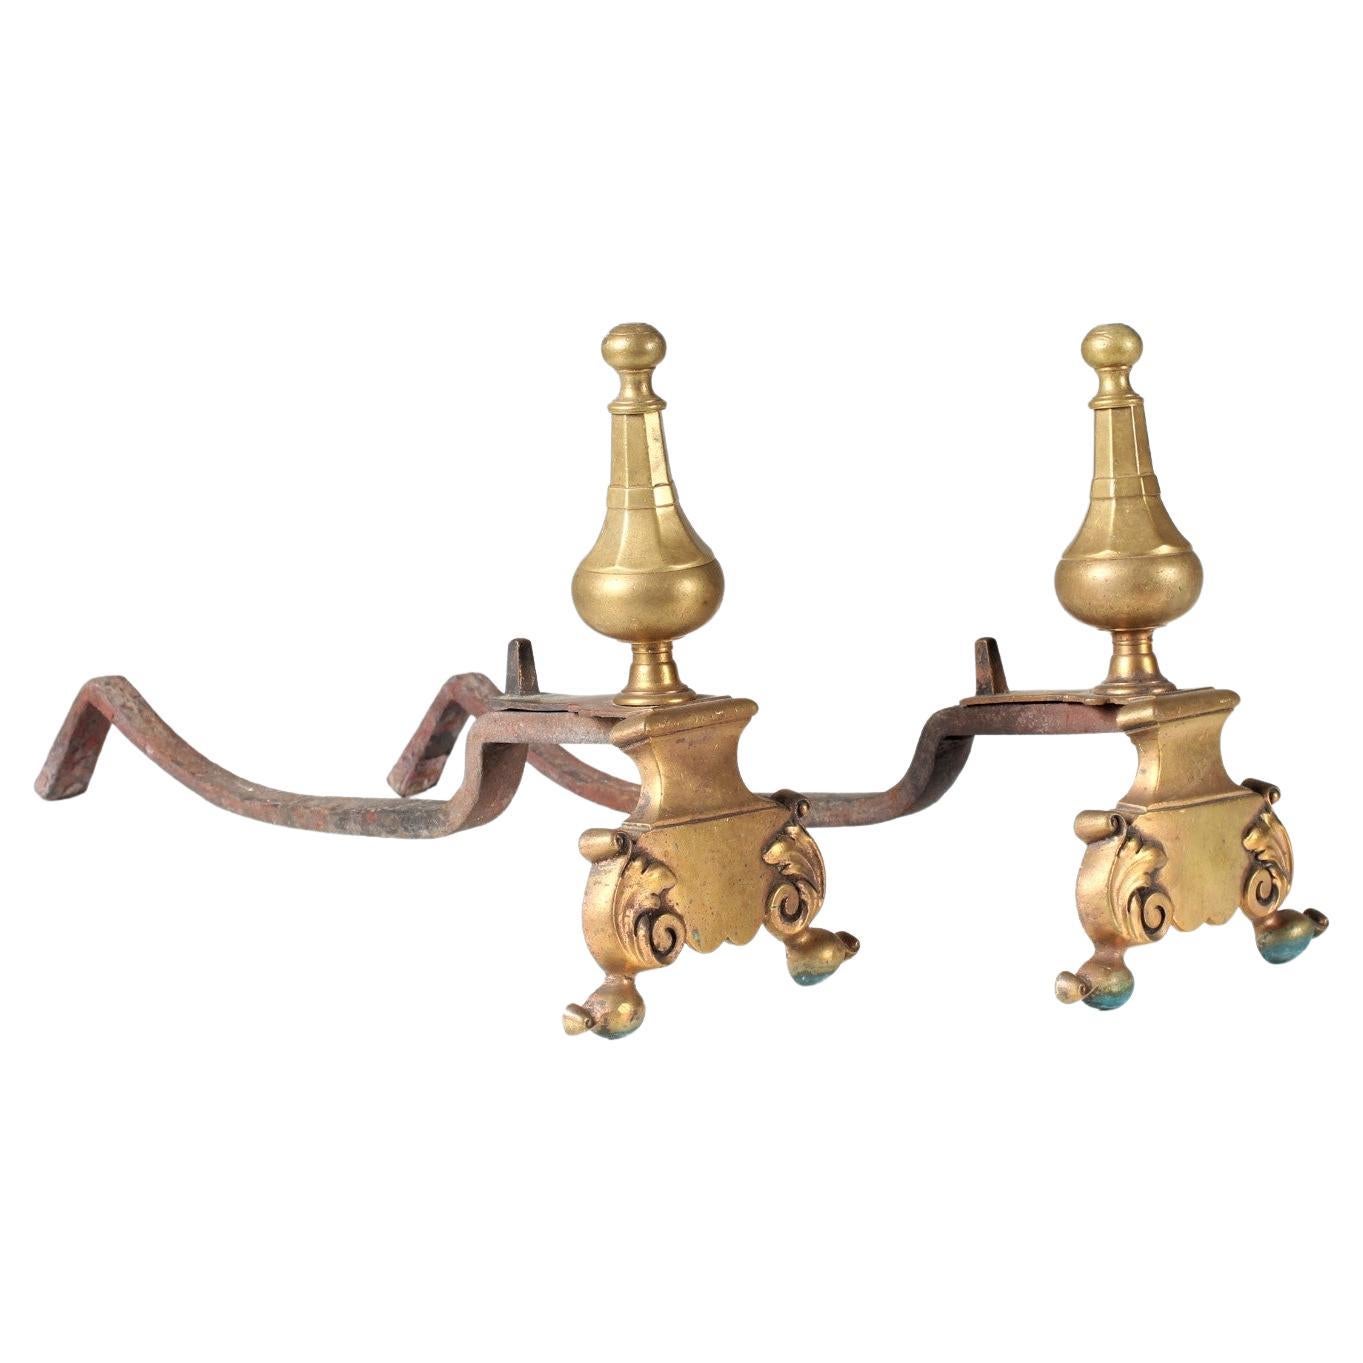 Antique Pair of Chimney Dogs, Andiron, Brass